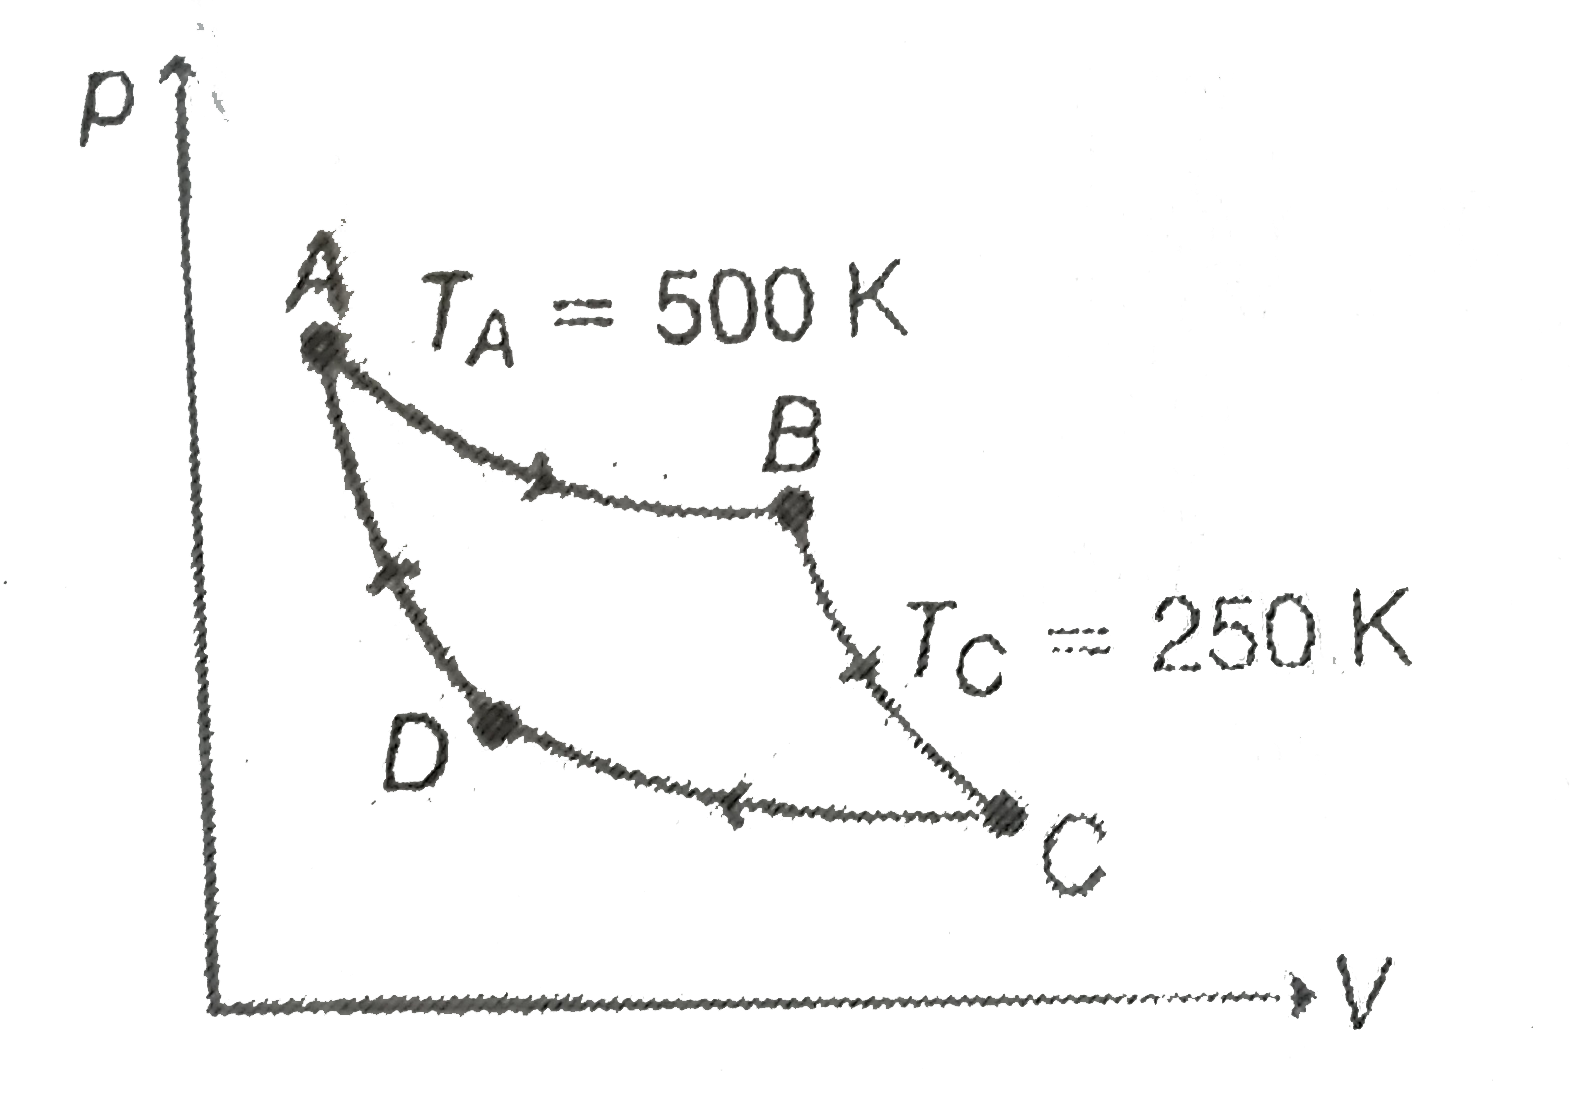 A monoatomic ideal is used as the working substance for the carnot cycle shown in the figure. Processes AB and CD are isothermal, while processes BC and DA are adiabatic. During process AB, 400 J of work is done by the gasd on the surroundings. How much heat is expelled by the gas during process CD?